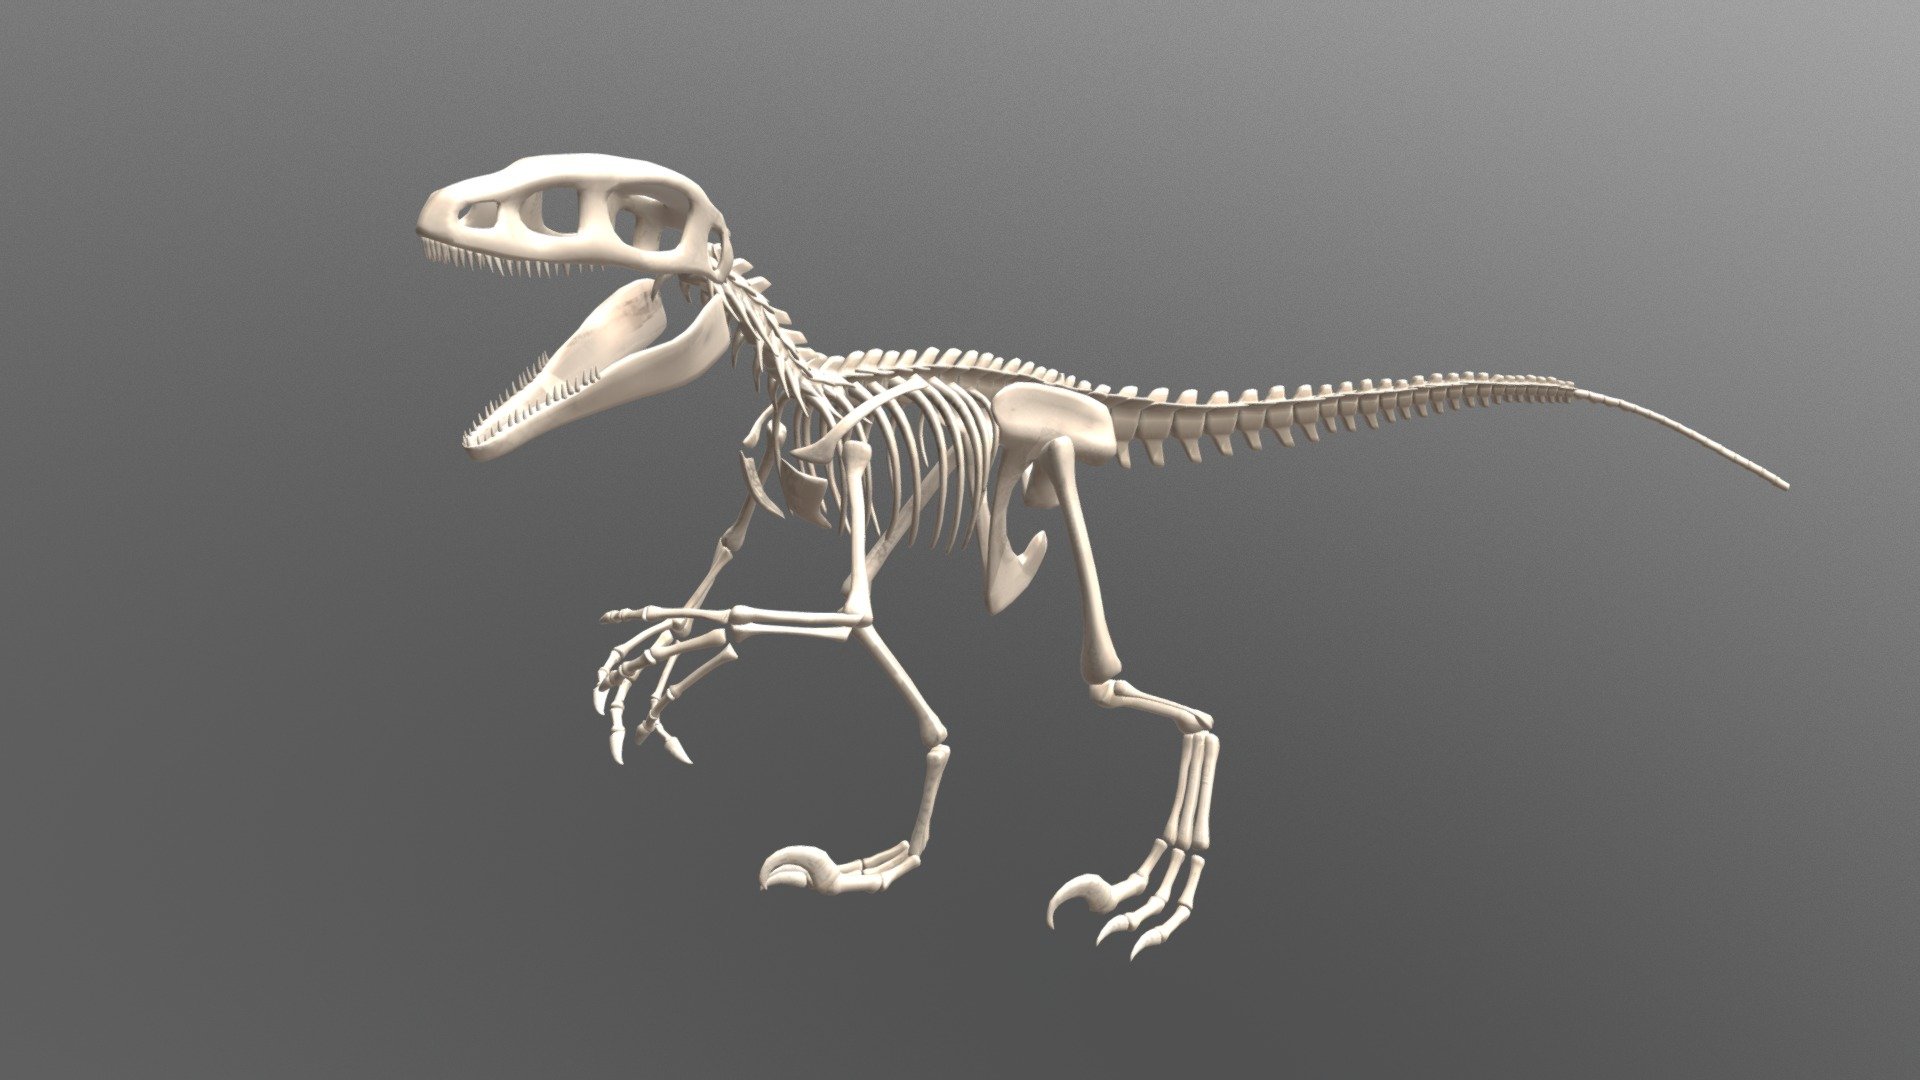 Anatomically based carnivore dinosaur skeleton is a part of X-Muscle System distributed as an X-Muscle System Anatomy Bundle  -link removed- - Carnivore Dinosaur Skeleton - 3D model by karab44 3d model